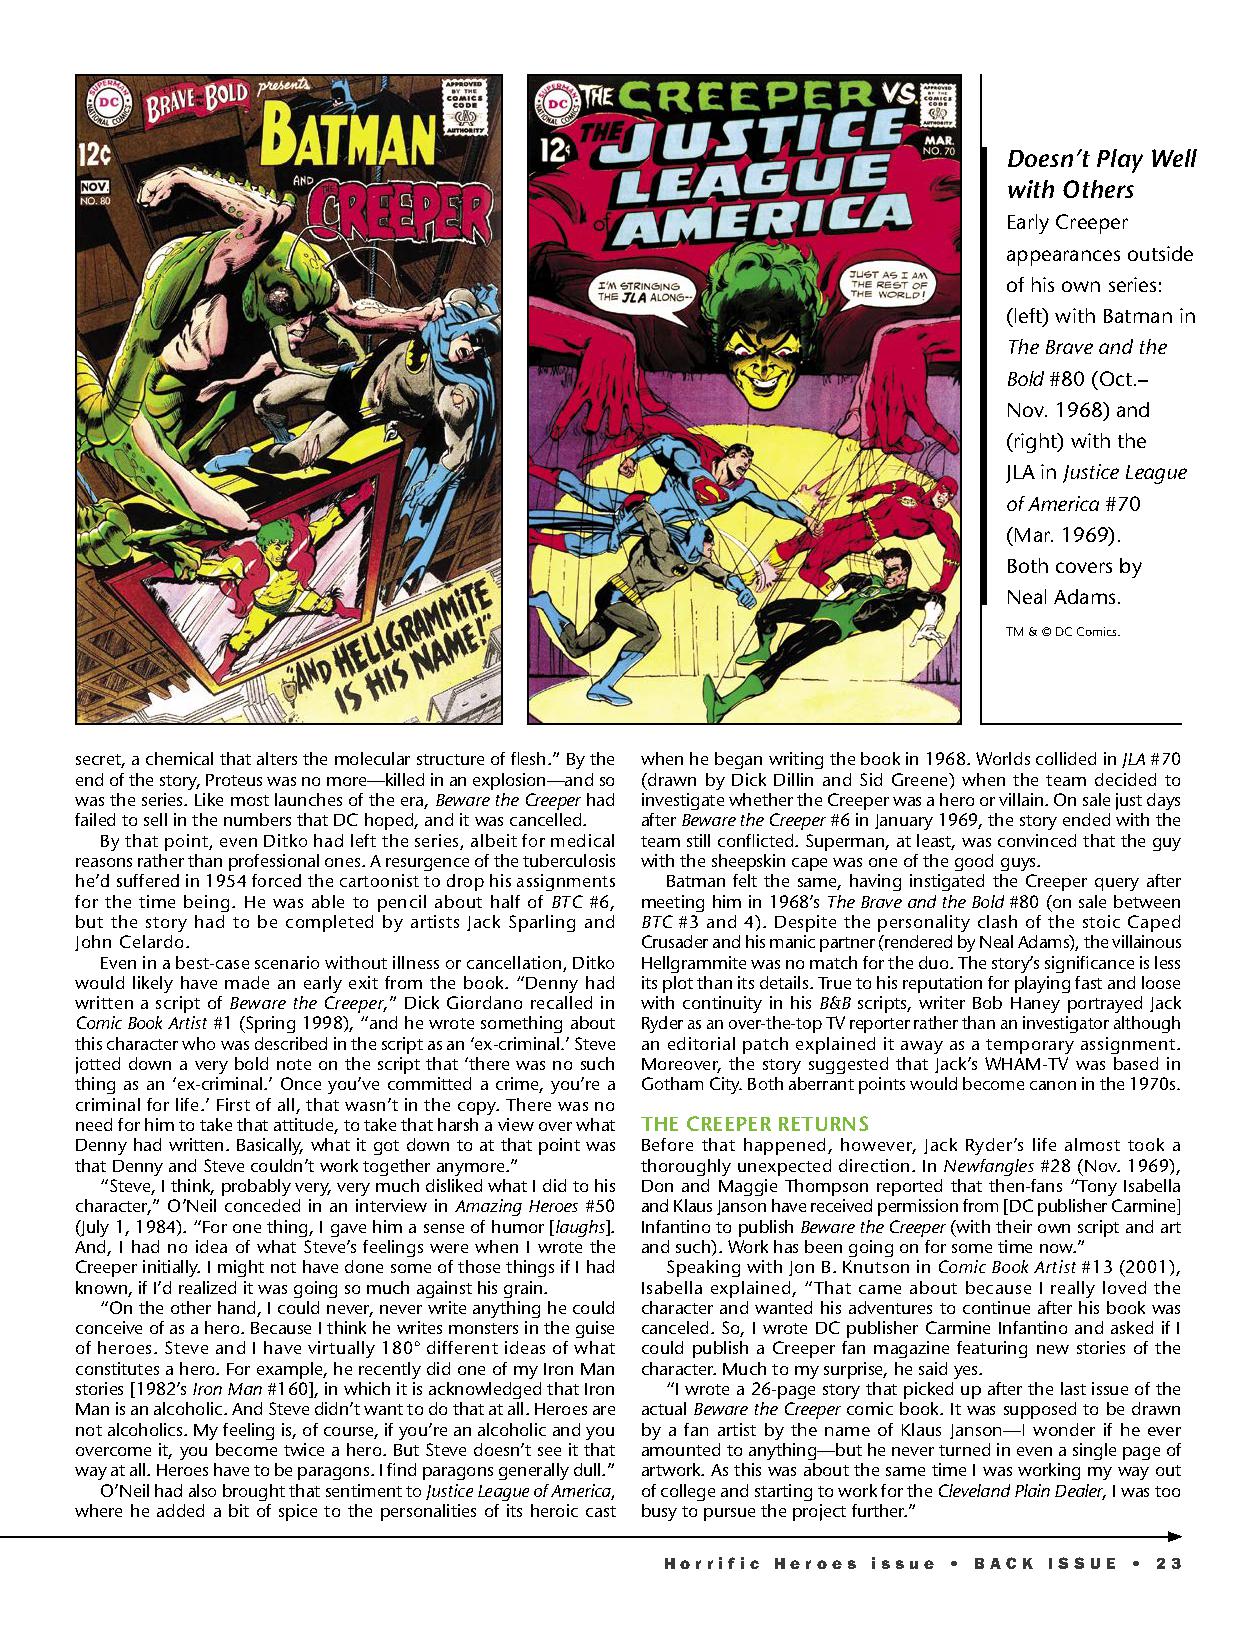 Read online Back Issue comic -  Issue #124 - 25